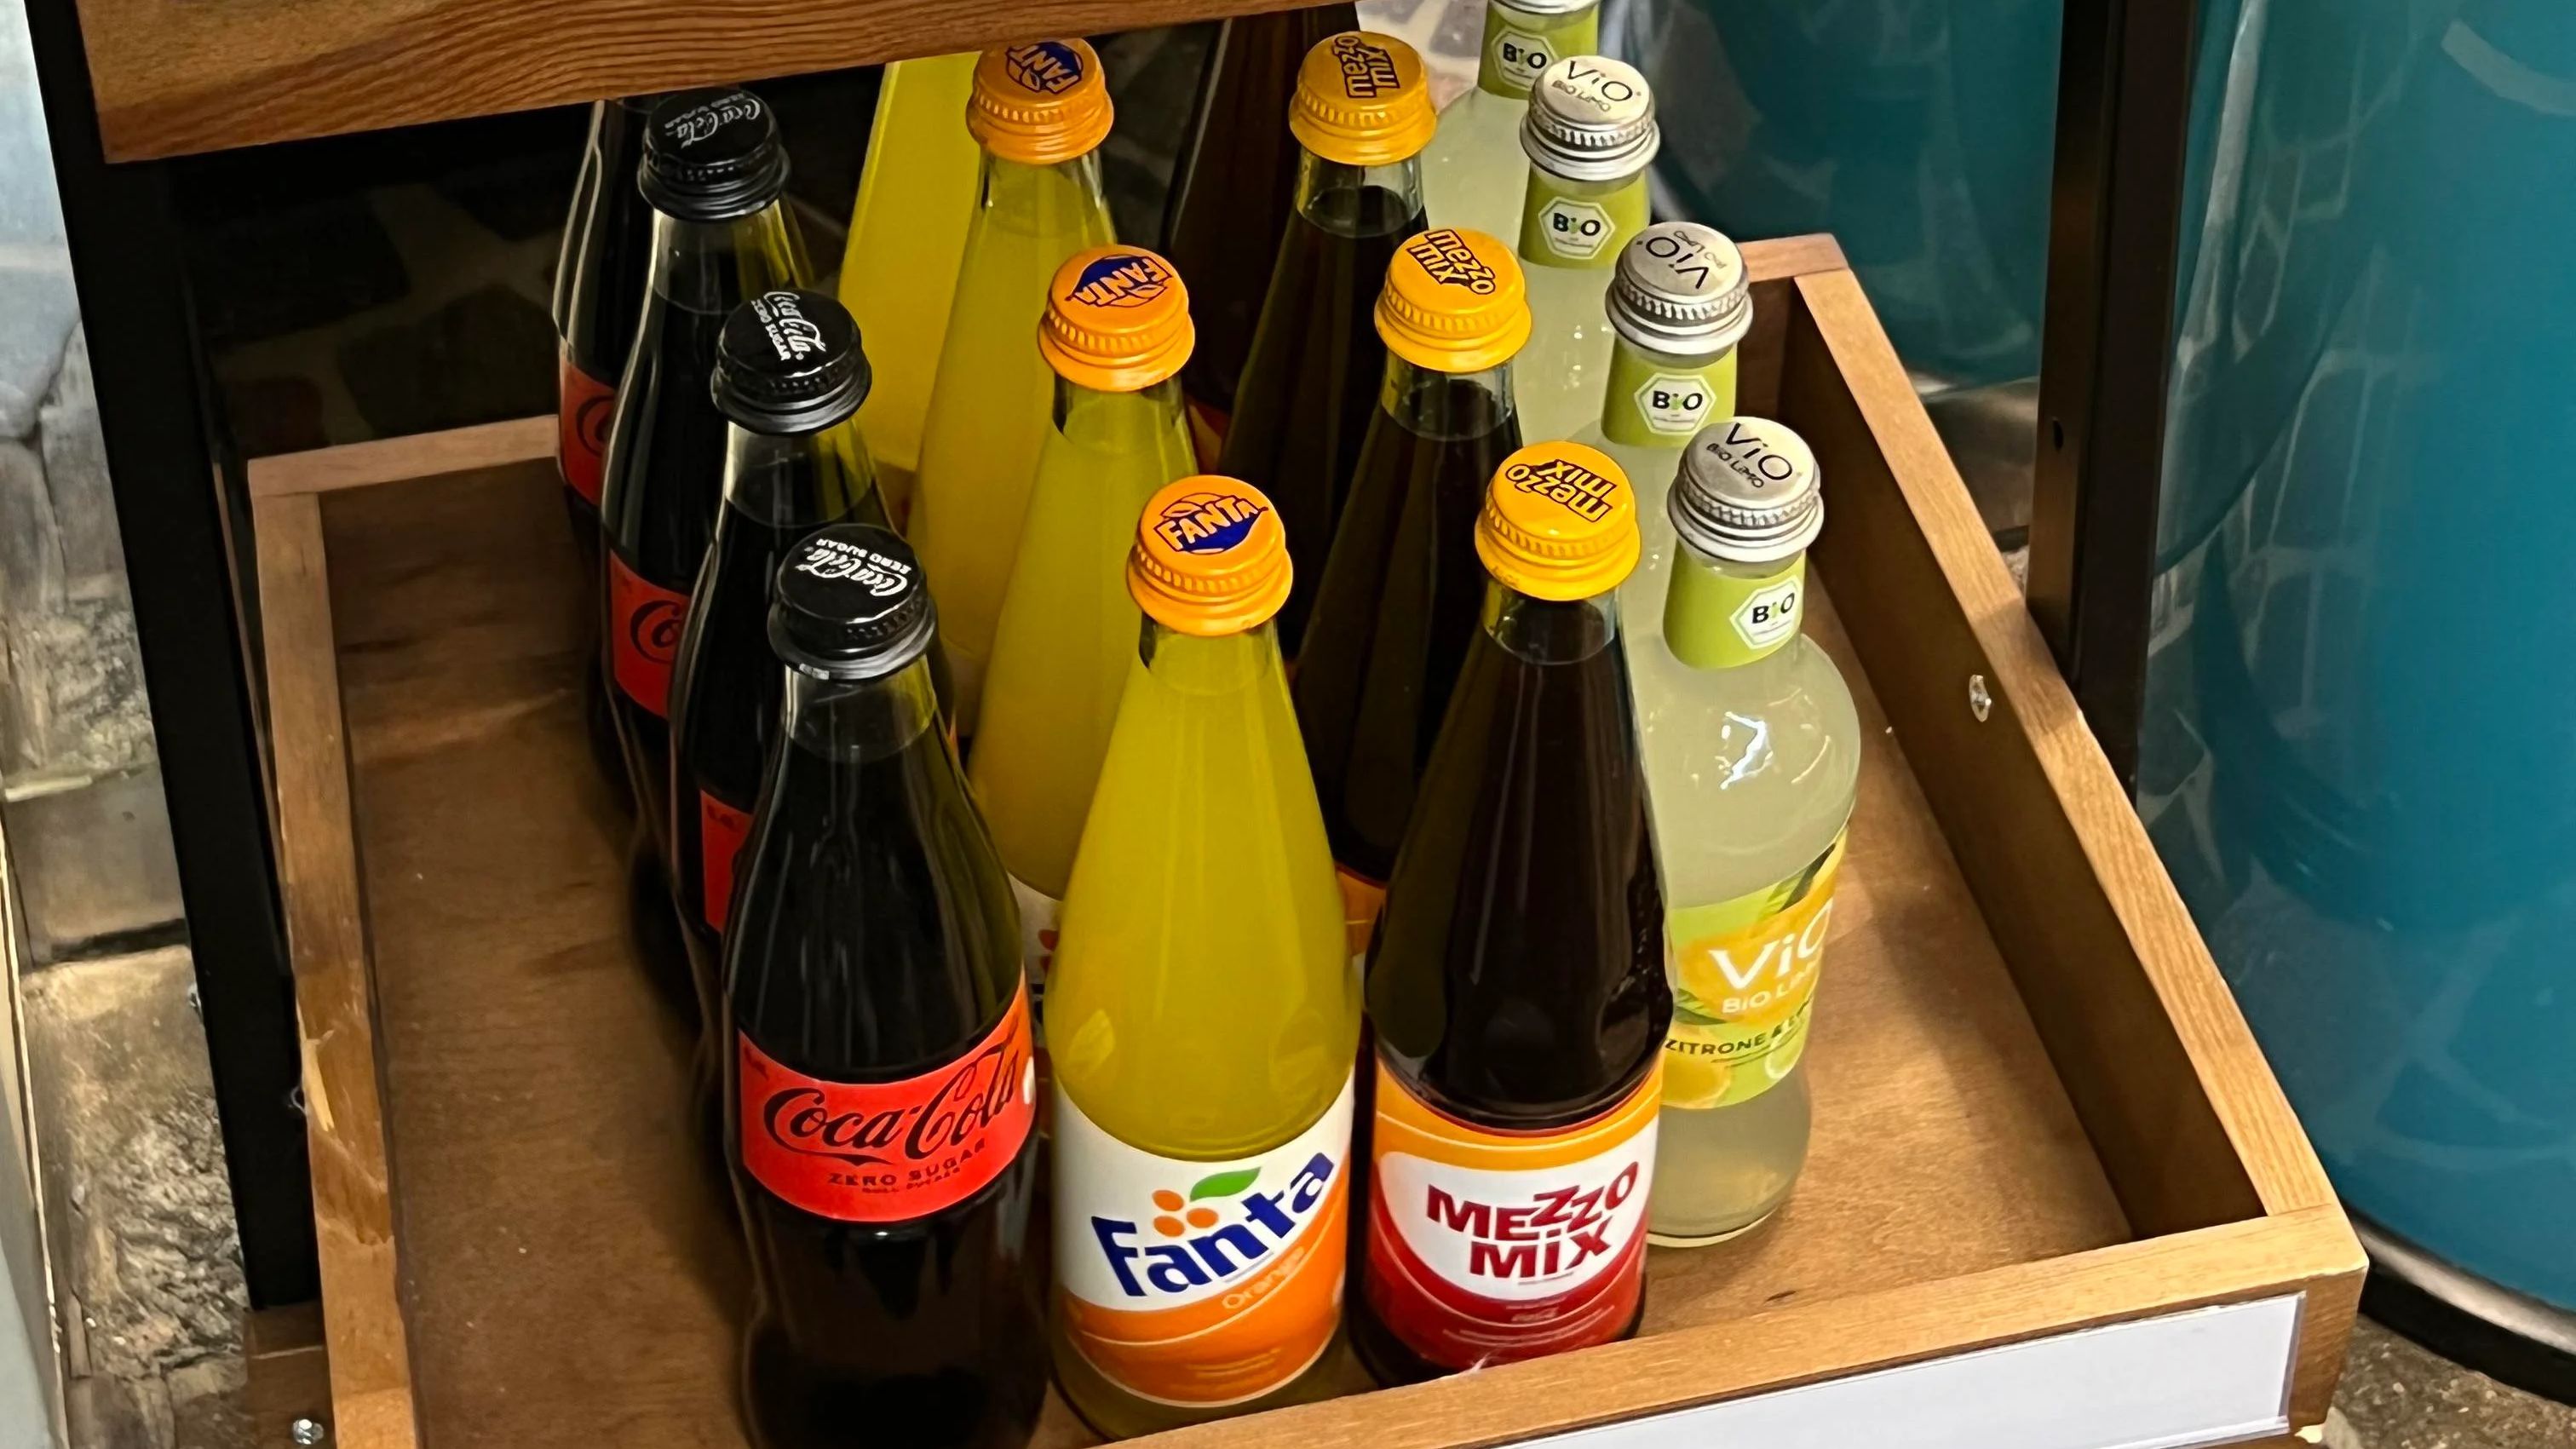 Mezzo Mix and other sodas